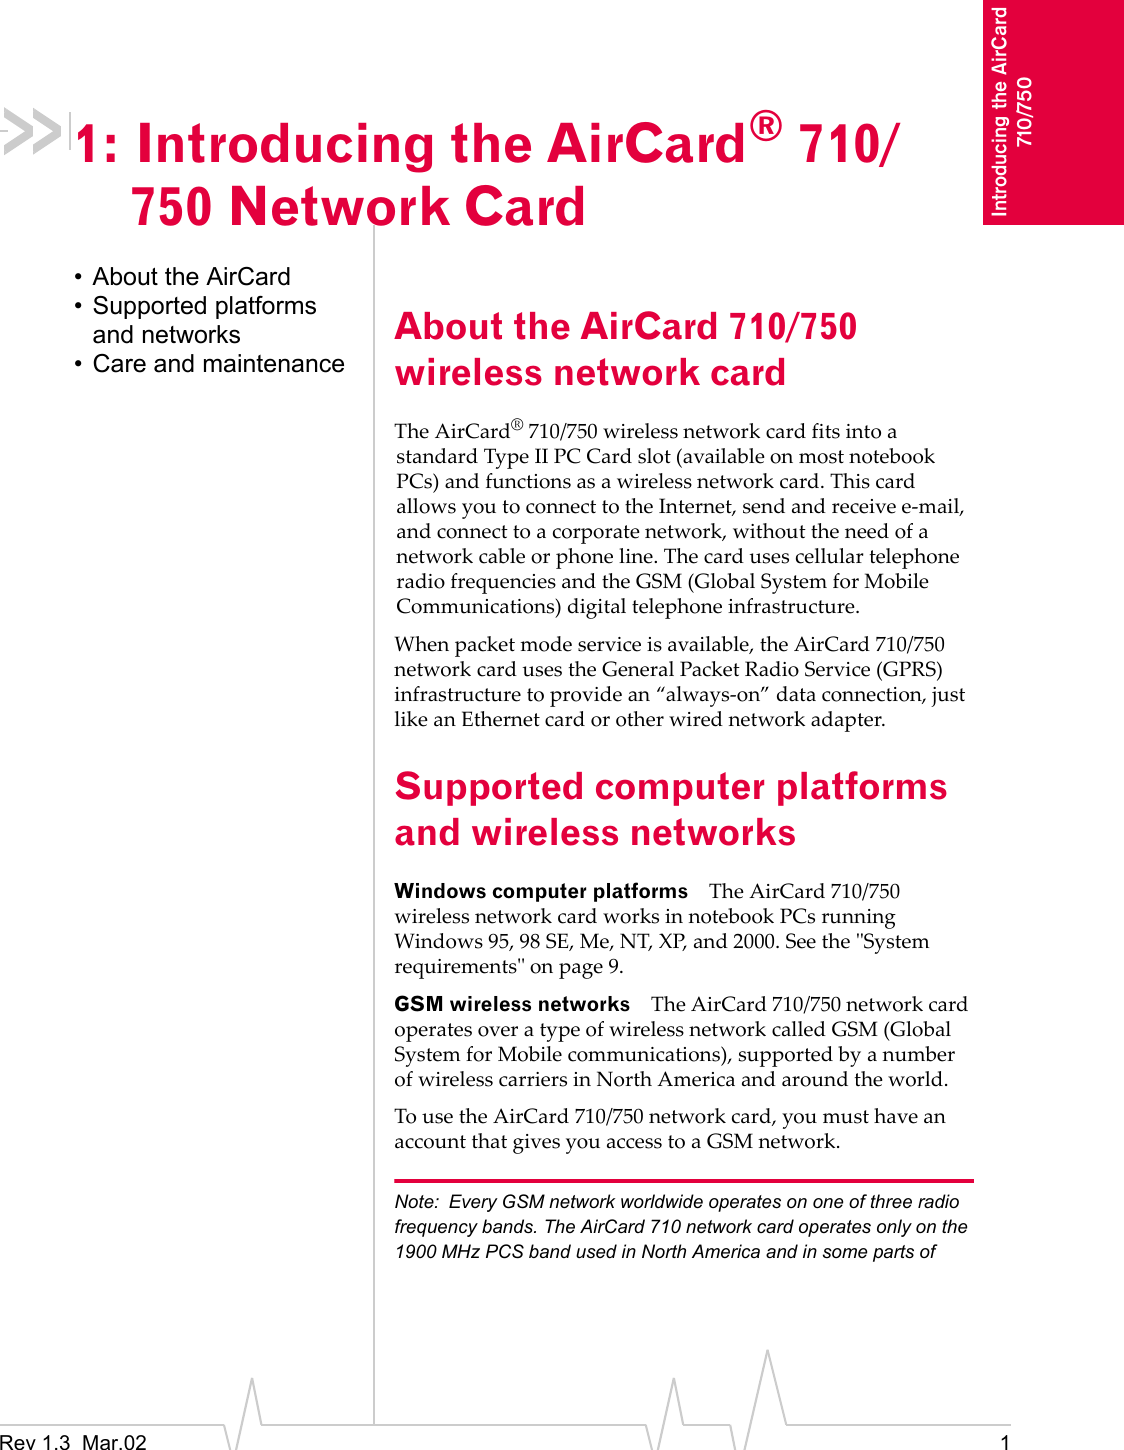 Rev 1.3  Mar.02 1Introducing the AirCard 710/7501: Introducing the AirCard® 710/750 Network Card• About the AirCard• Supported platforms and networks• Care and maintenanceAbout the AirCard 710/750 wireless network cardThe AirCard® 710/750 wireless network card fits into a standard Type II PC Card slot (available on most notebook PCs) and functions as a wireless network card. This card allows you to connect to the Internet, send and receive e-mail, and connect to a corporate network, without the need of a network cable or phone line. The card uses cellular telephone radio frequencies and the GSM (Global System for Mobile Communications) digital telephone infrastructure.When packet mode service is available, the AirCard 710/750 network card uses the General Packet Radio Service (GPRS) infrastructure to provide an “always-on” data connection, just like an Ethernet card or other wired network adapter.Supported computer platforms and wireless networksWindows computer platforms The AirCard 710/750 wireless network card works in notebook PCs running Windows 95, 98 SE, Me, NT, XP, and 2000. See the &quot;System requirements&quot; on page 9.GSM wireless networks The AirCard 710/750 network card operates over a type of wireless network called GSM (Global System for Mobile communications), supported by a number of wireless carriers in North America and around the world.To use the AirCard 710/750 network card, you must have an account that gives you access to a GSM network.Note: Every GSM network worldwide operates on one of three radio frequency bands. The AirCard 710 network card operates only on the 1900 MHz PCS band used in North America and in some parts of 